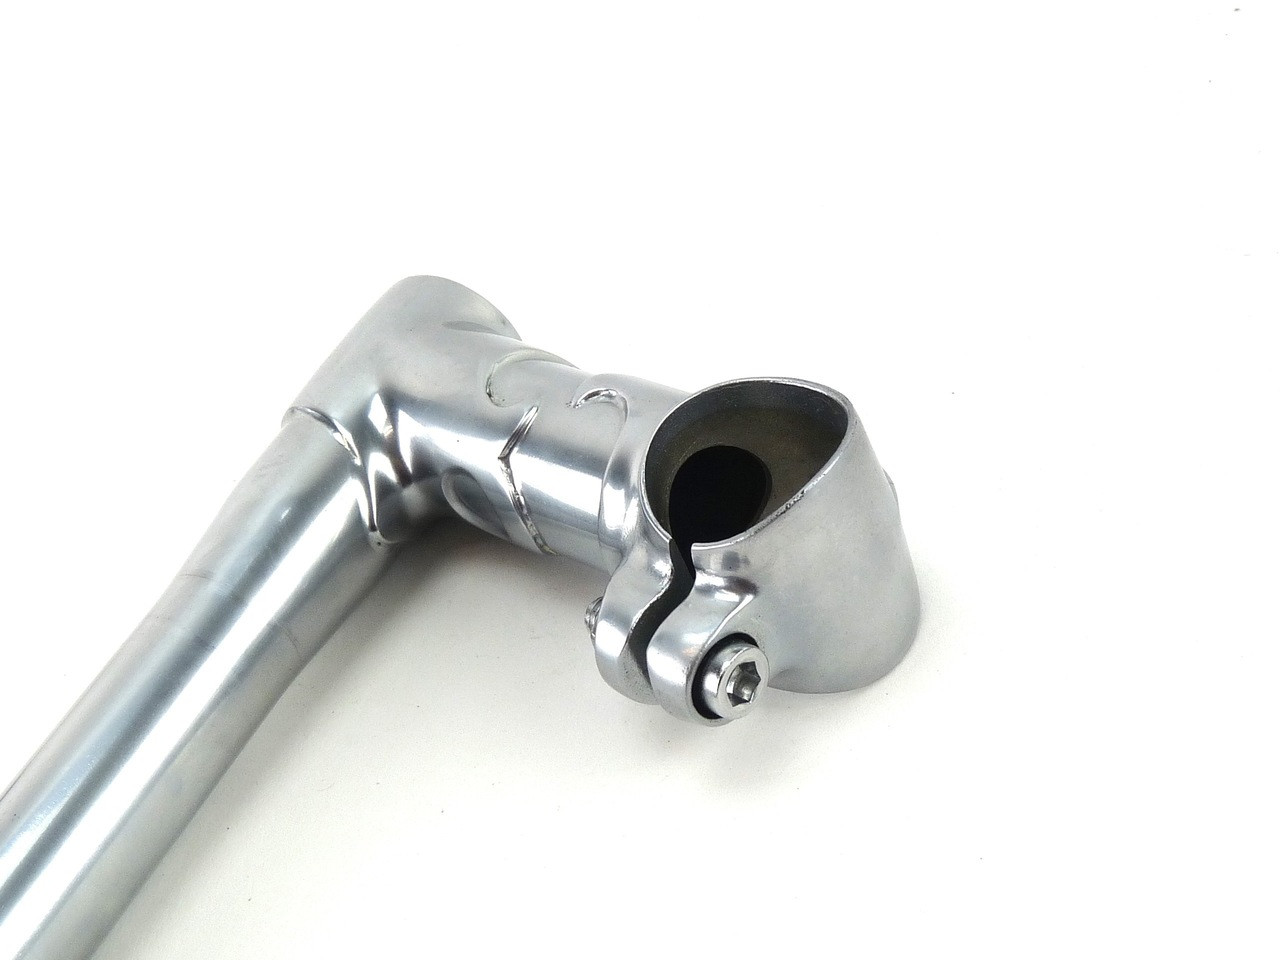 Nitto Lugged Stem 1" Quill 75mm 22.2 85mm 26mm